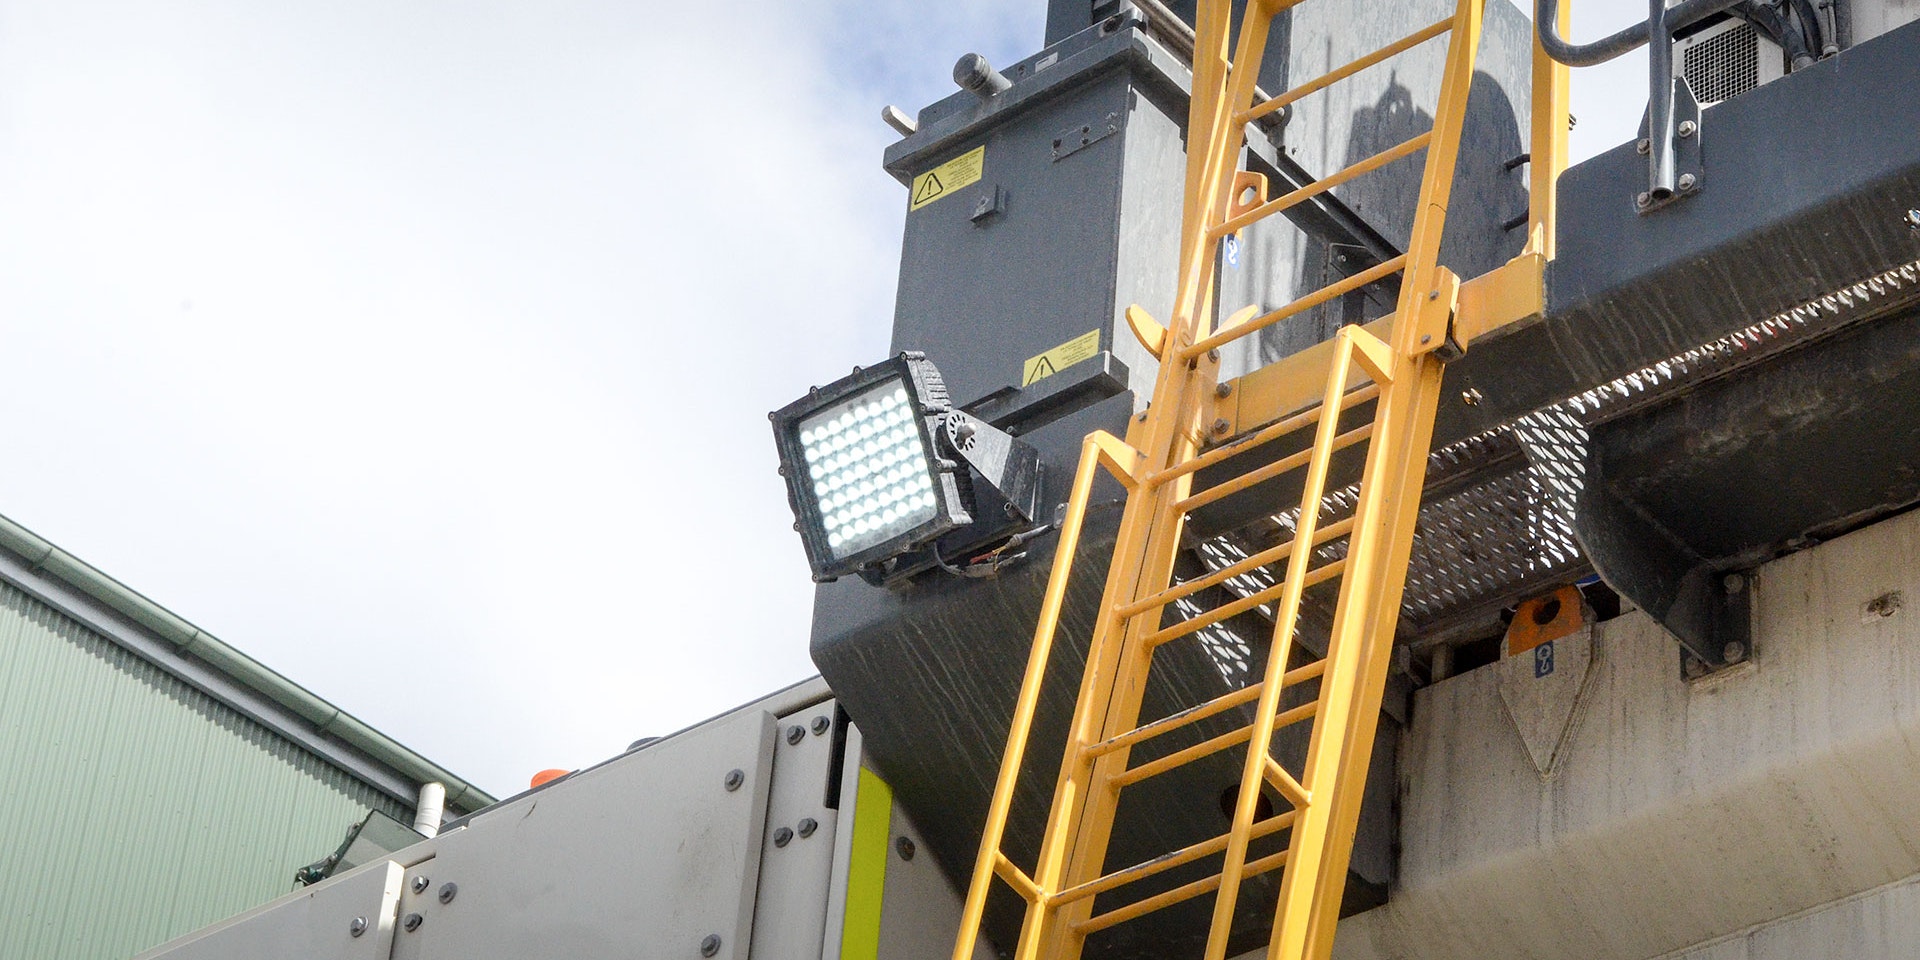 CP56 LED Flood Light in application, installed on a 996 liebherr excavator on an industrial / mine site